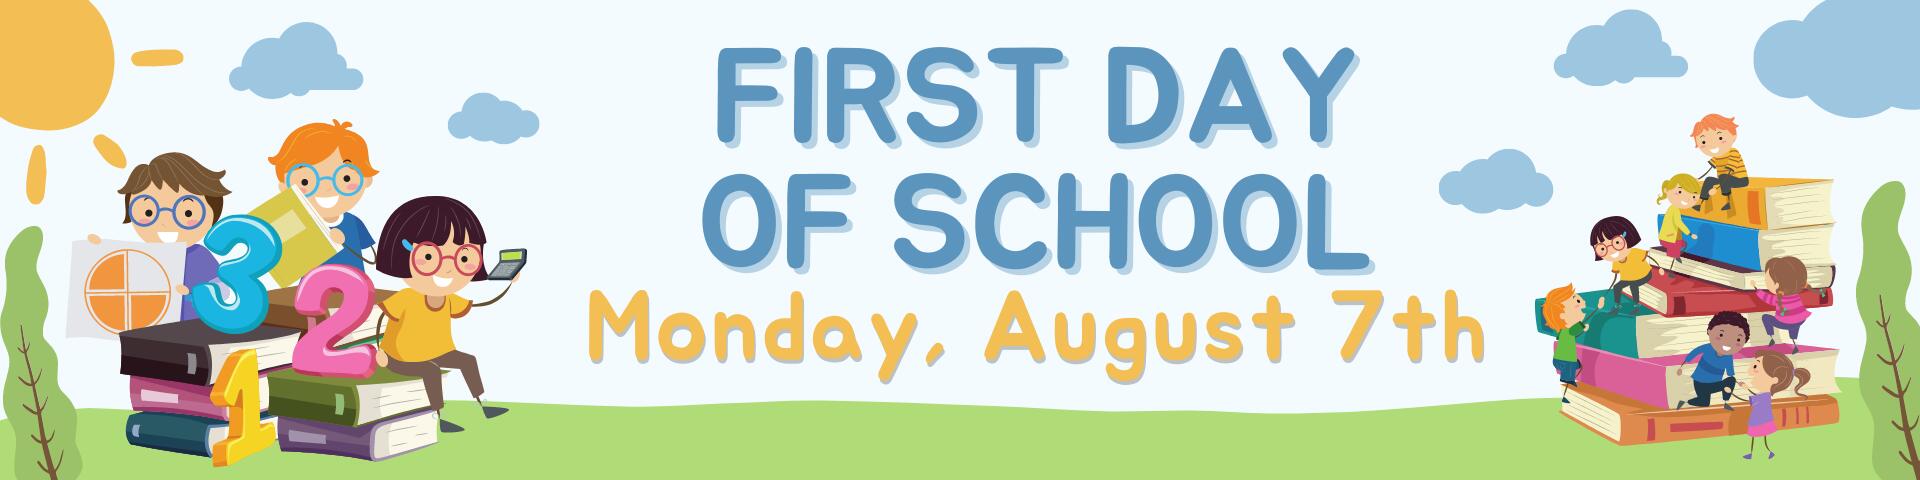 first day of school will be monday august 7th